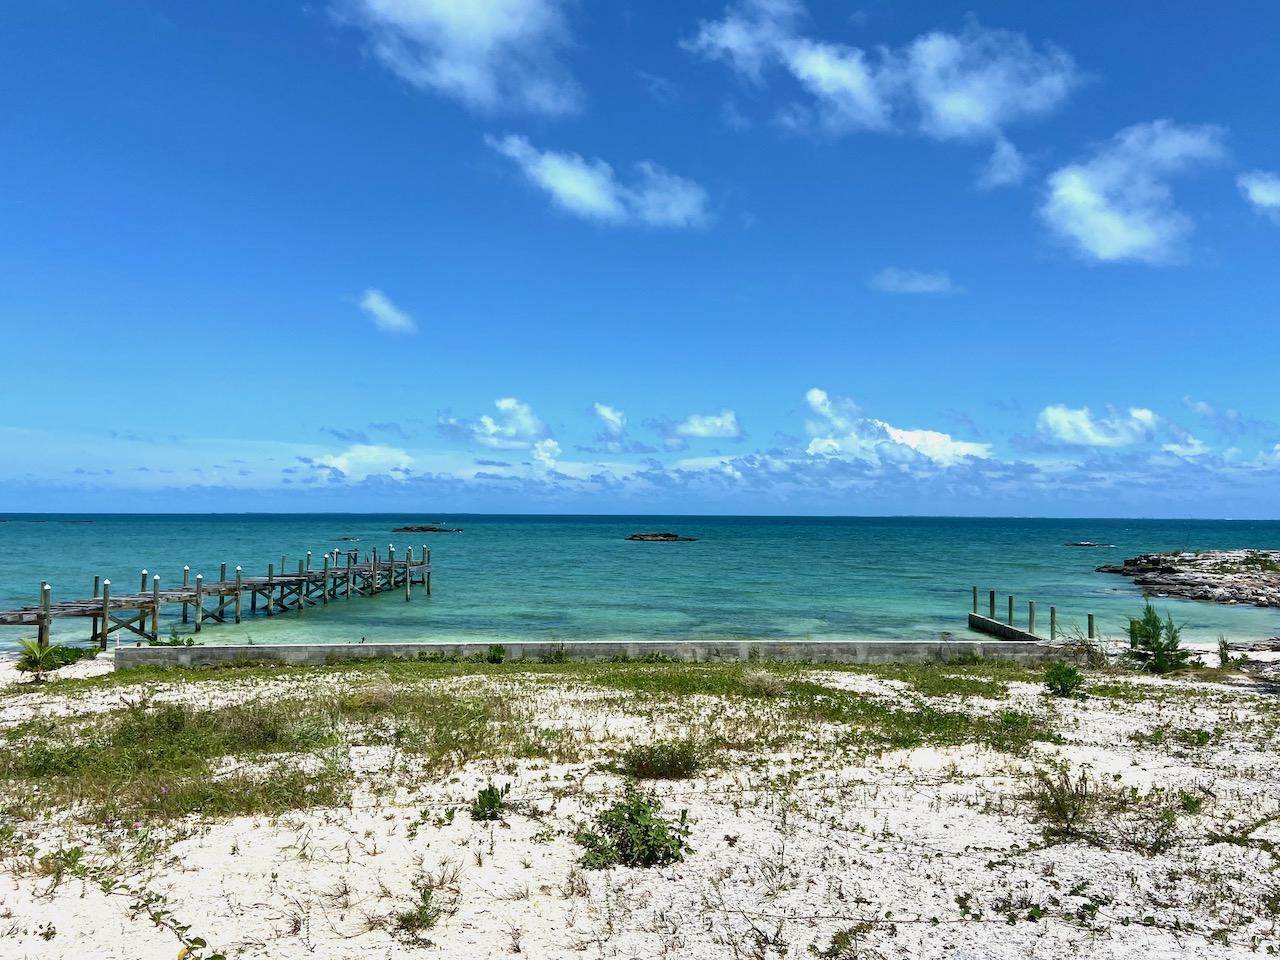 6. Land for Sale at Leisure Lee, Abaco Bahamas